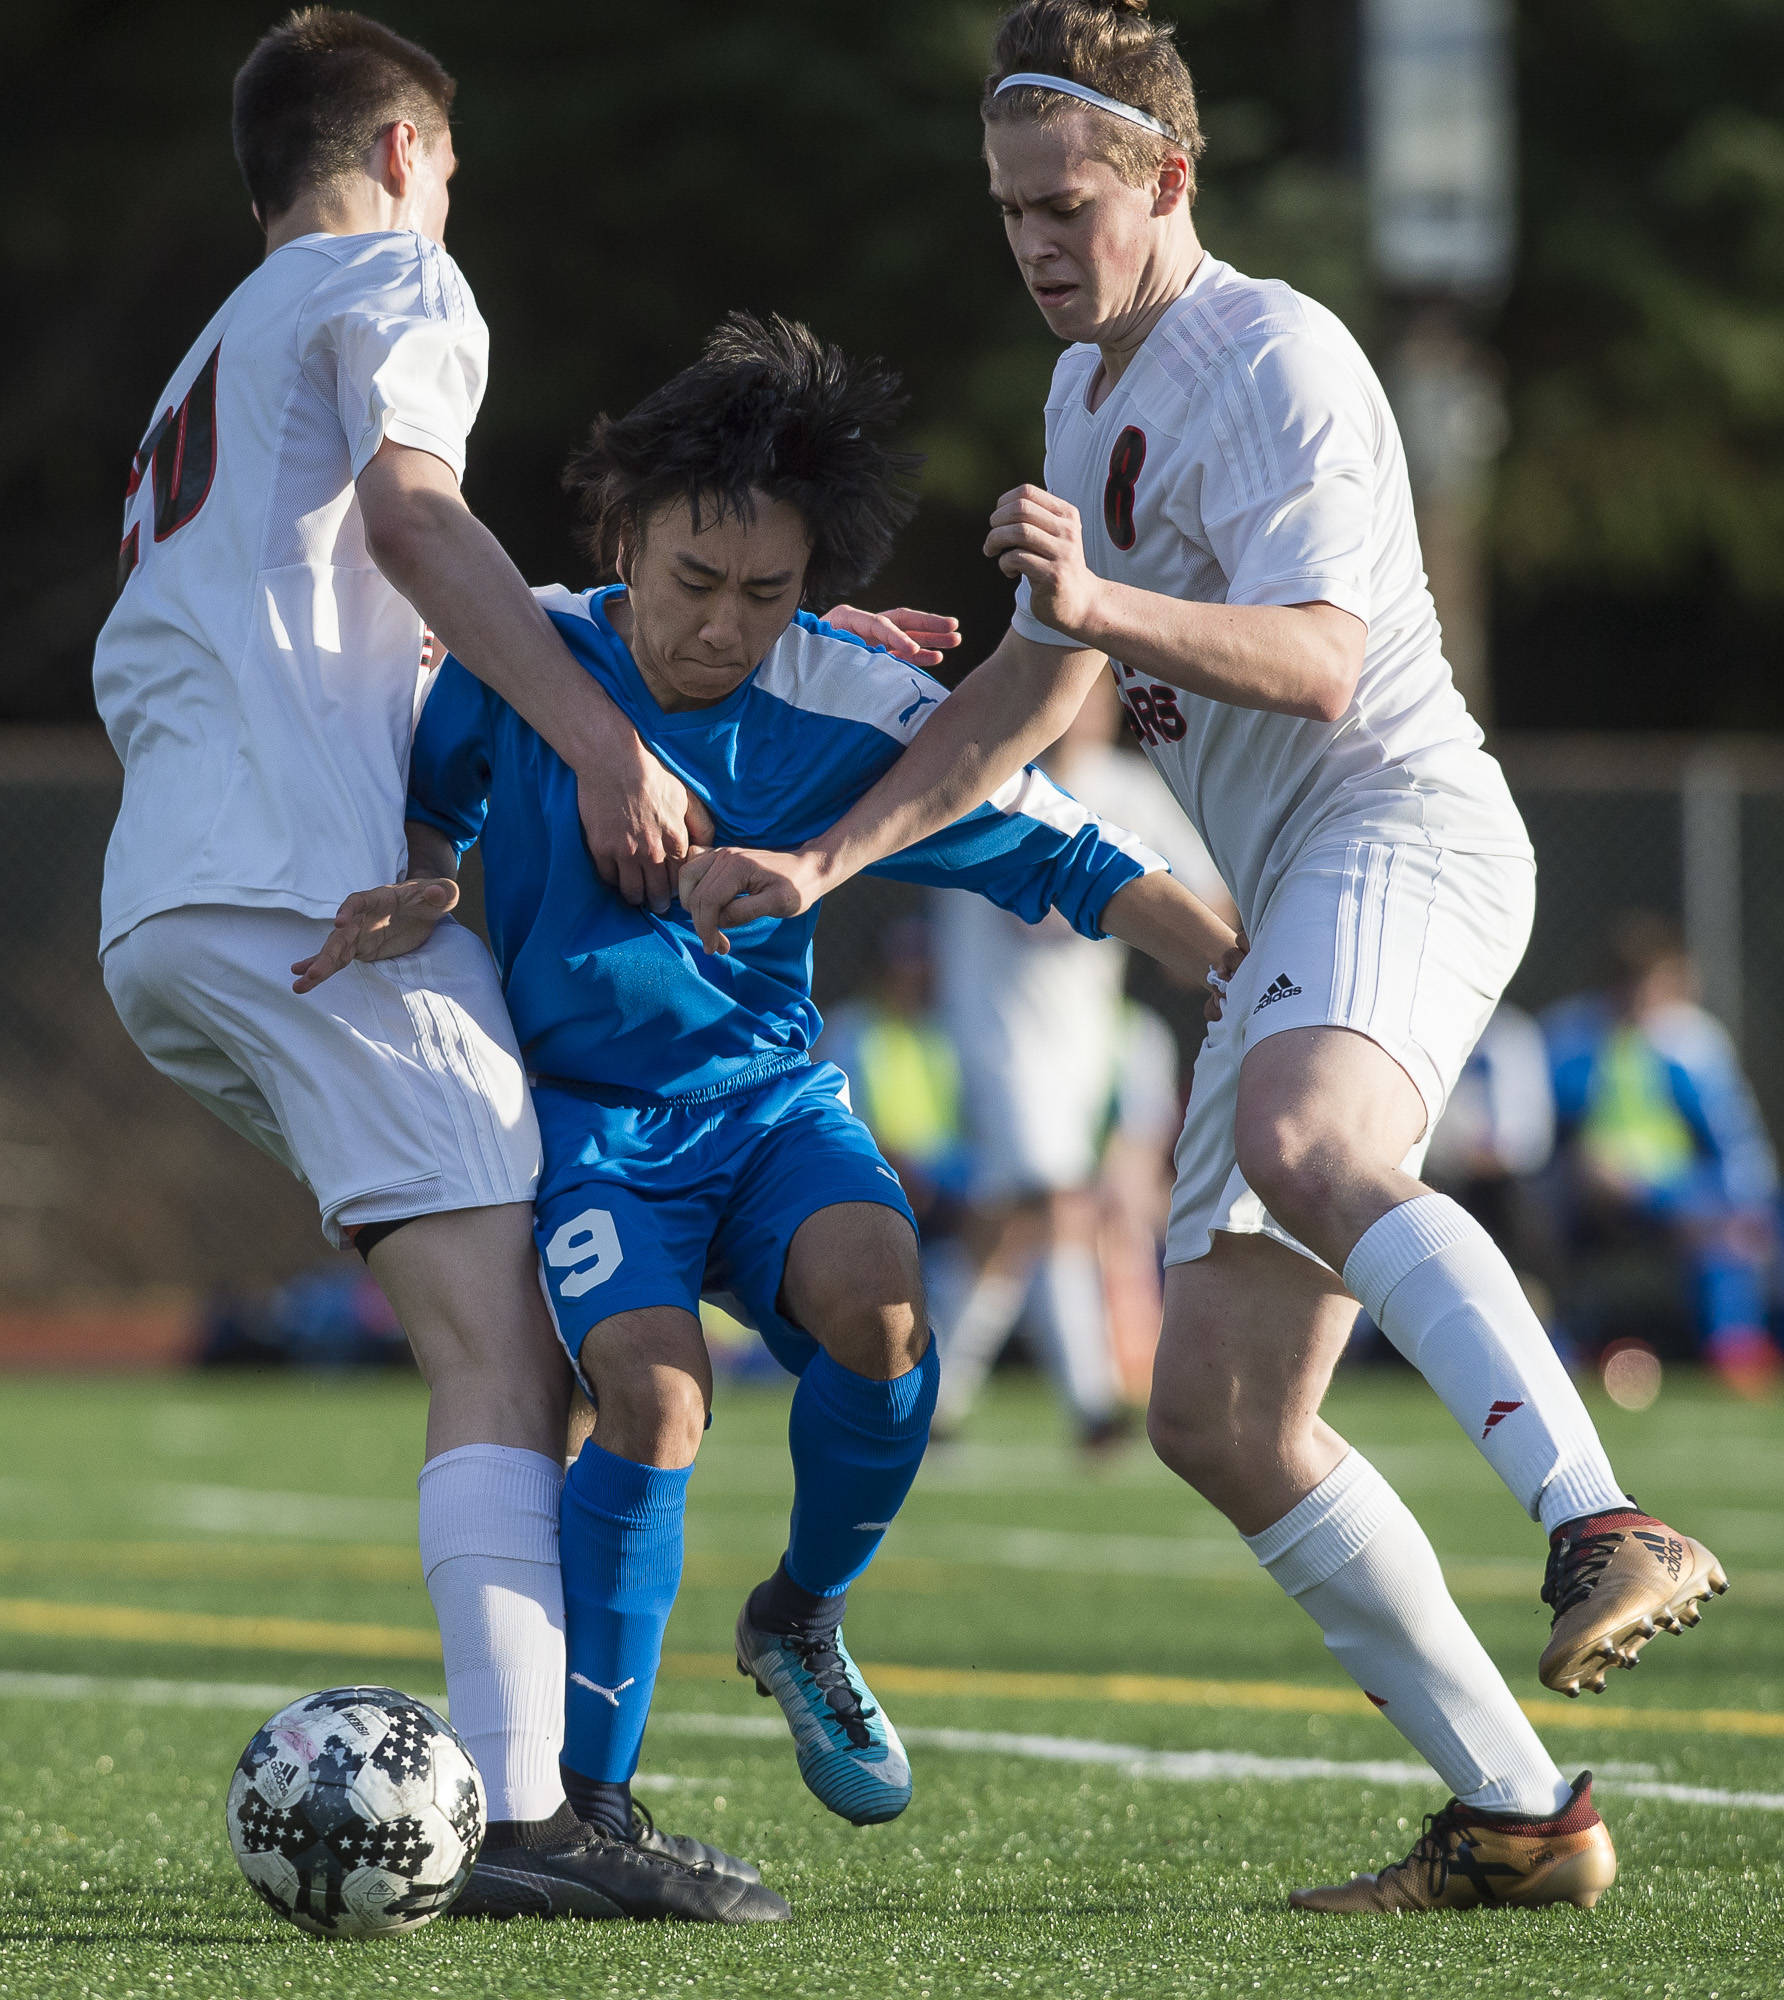 Thunder Mountain’s Marc Manlulu is pinned between Juneau-Douglas’ Ben Campbell, left, and Tulio Fontanella at Adair-Kennedy Memorial Park on Tuesday, May 8, 2018. The game ended in a 2-2 tie. (Michael Penn | Juneau Empire)